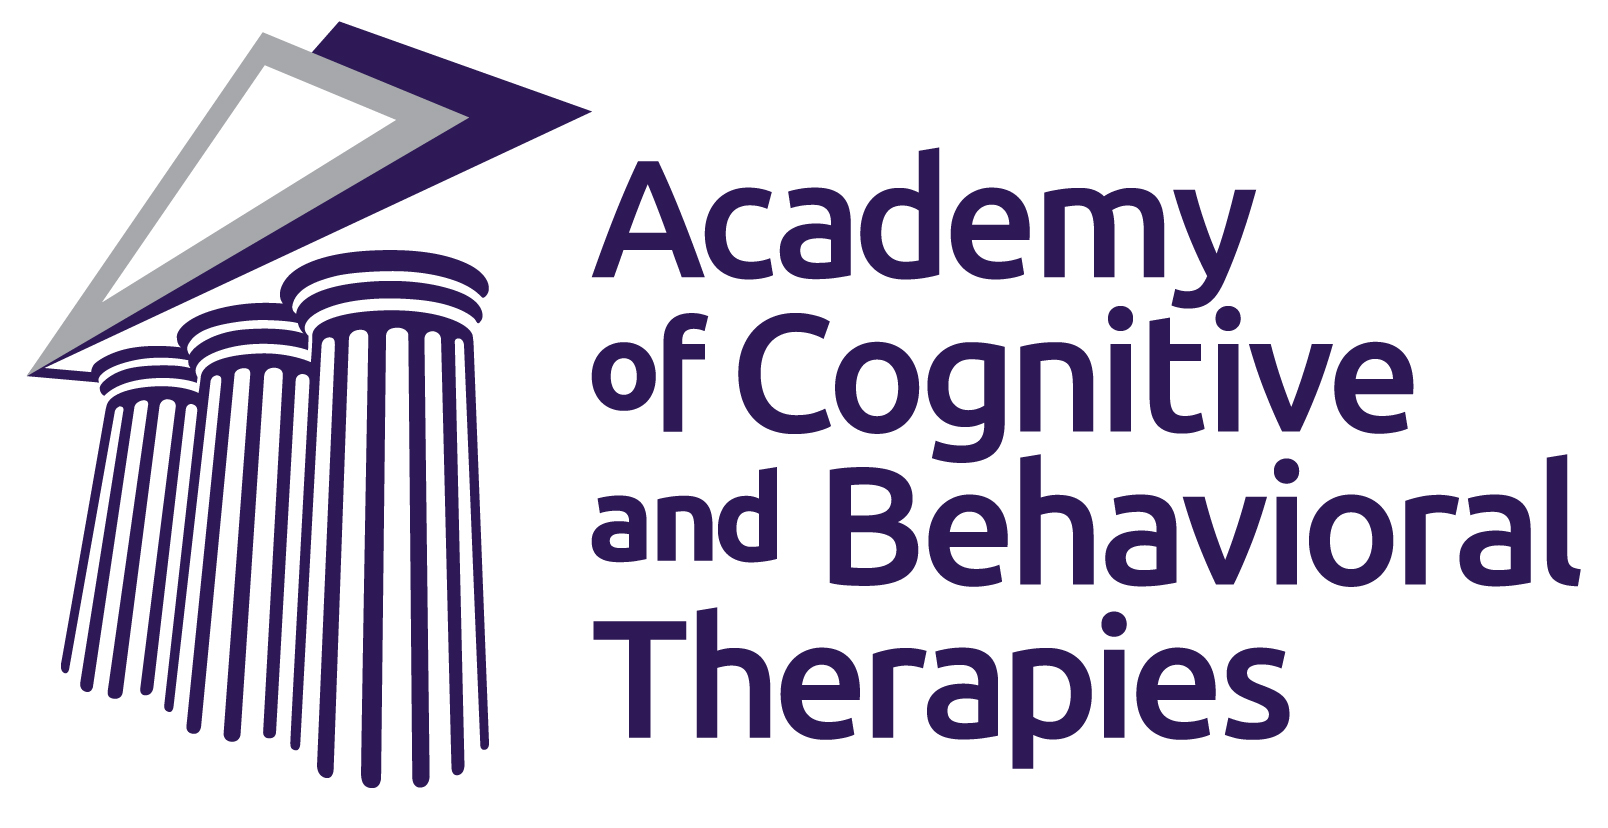 Academy of Cognitive and Behavioral Therapies